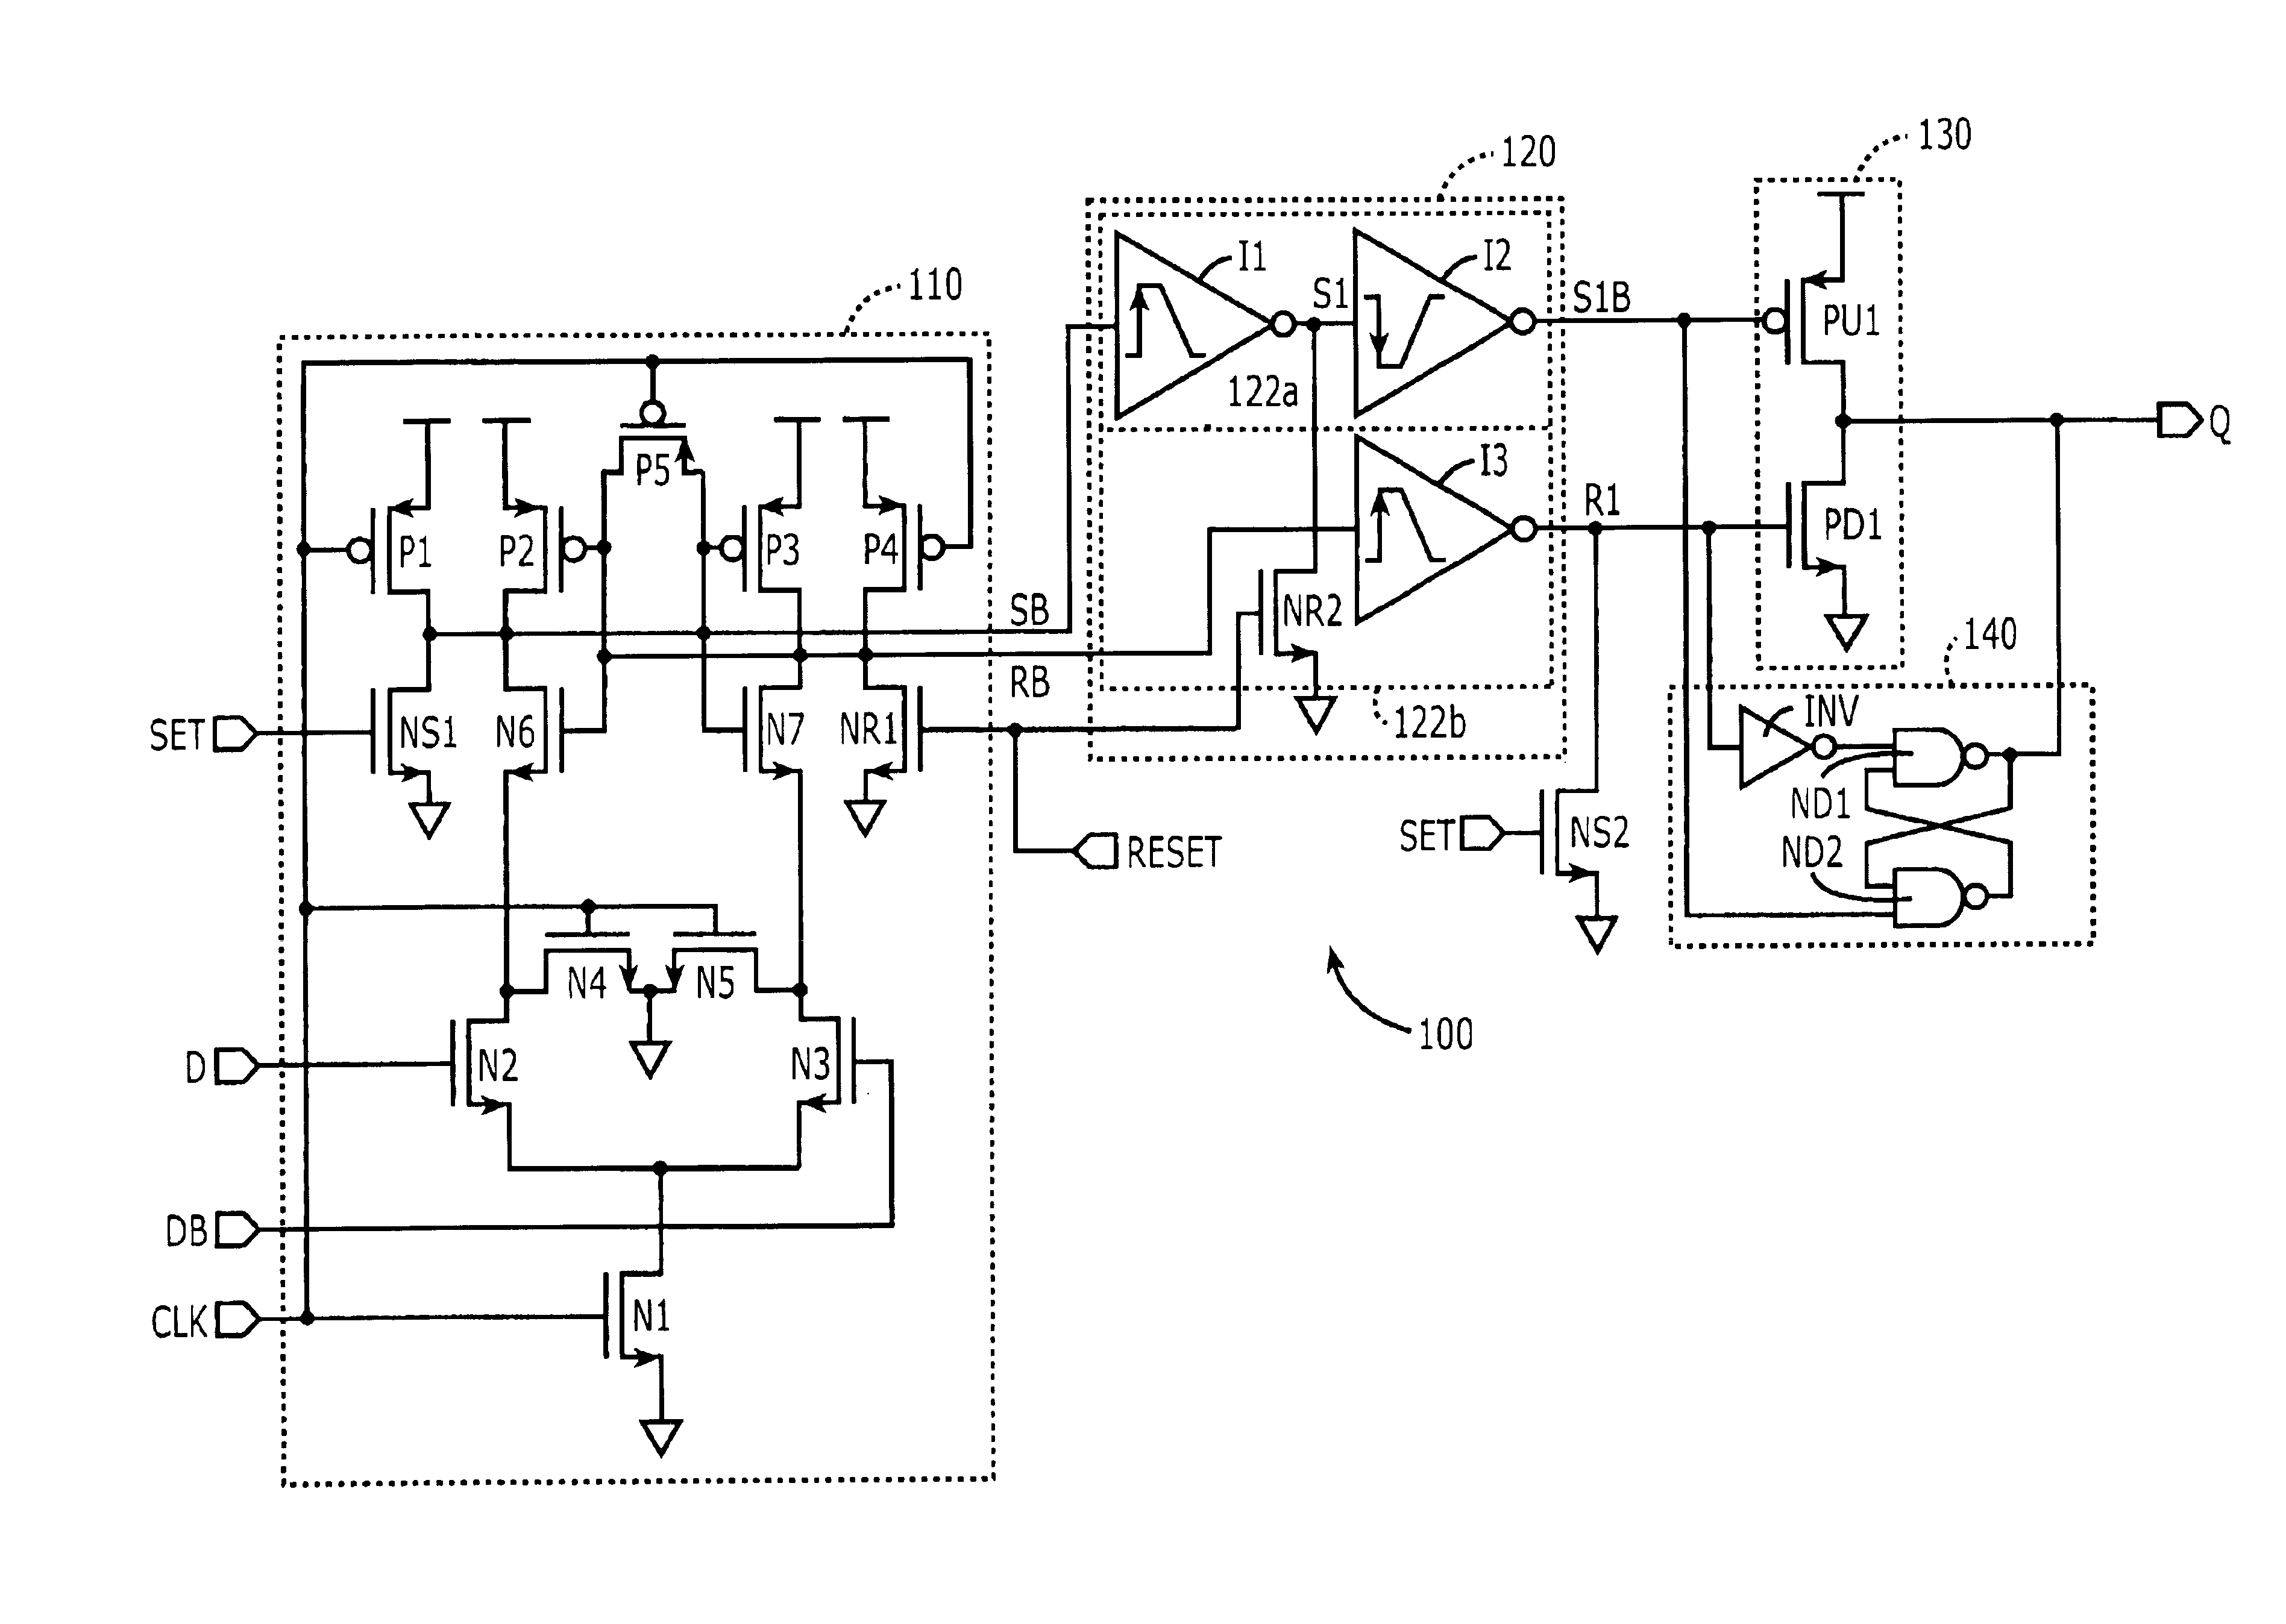 Edge accelerated sense amplifier flip-flop with high fanout drive capability